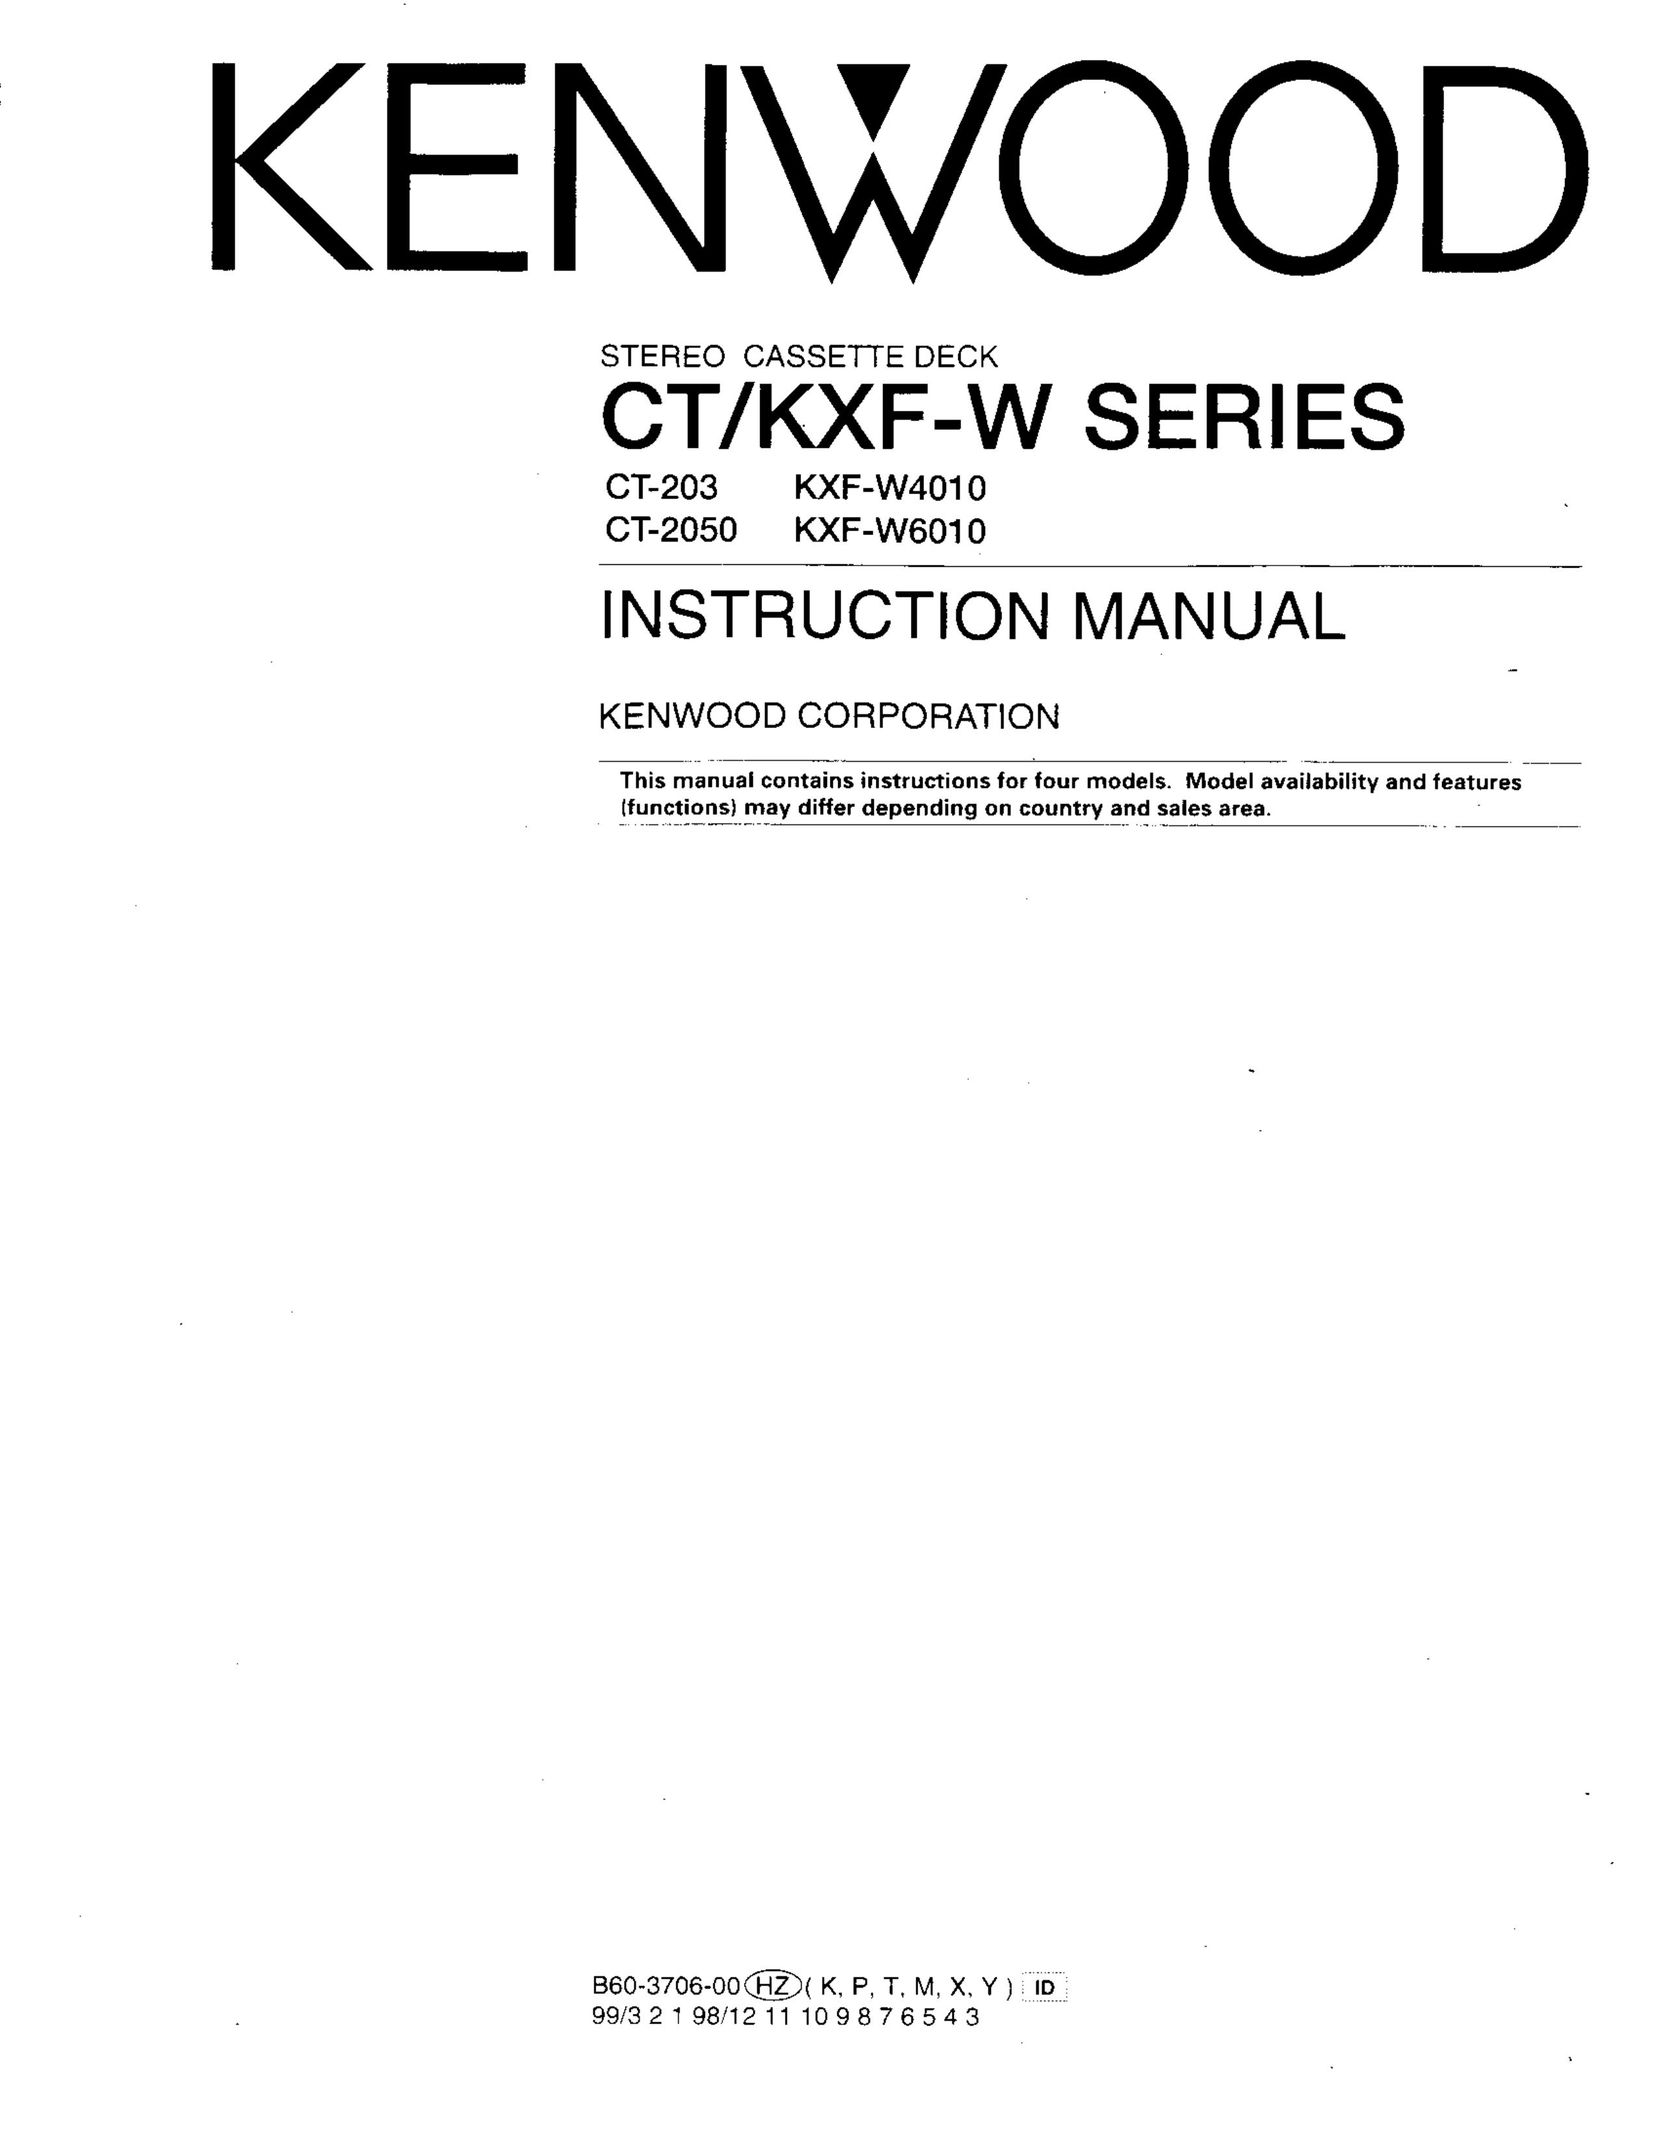 Kenwood CT-2050 Car Stereo System User Manual